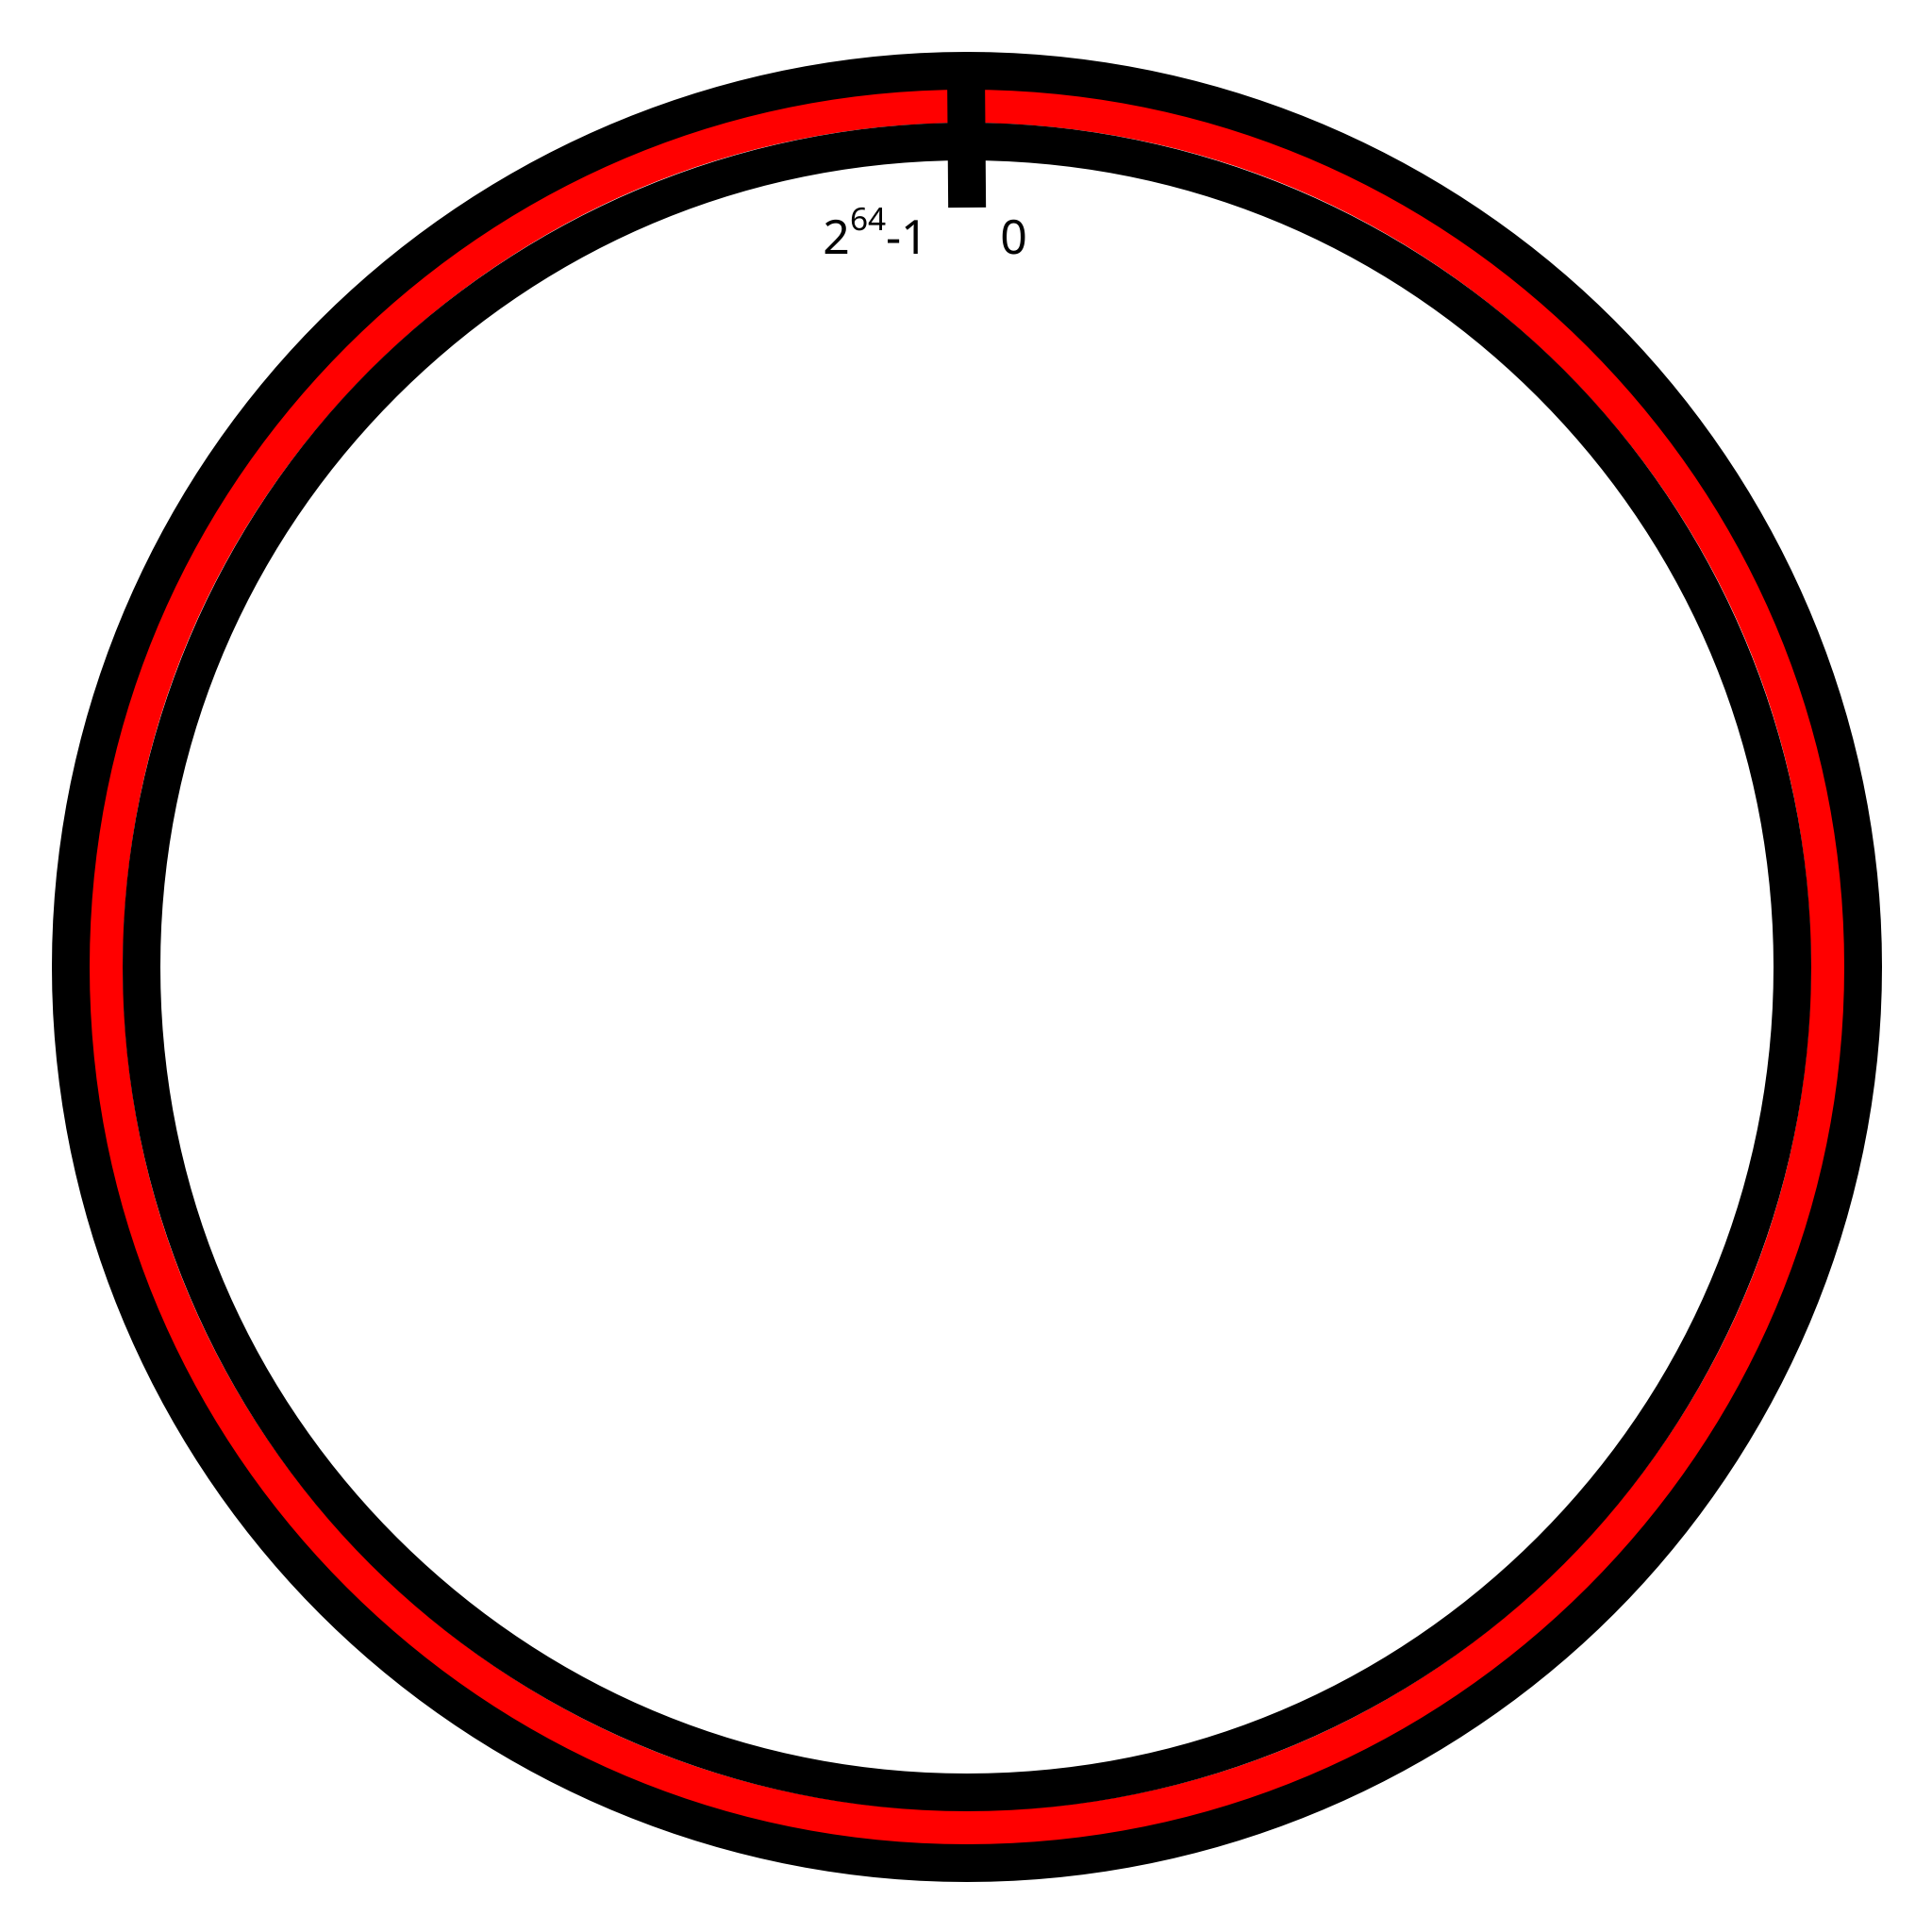 The same ring, with the region 0 to the end selected in red